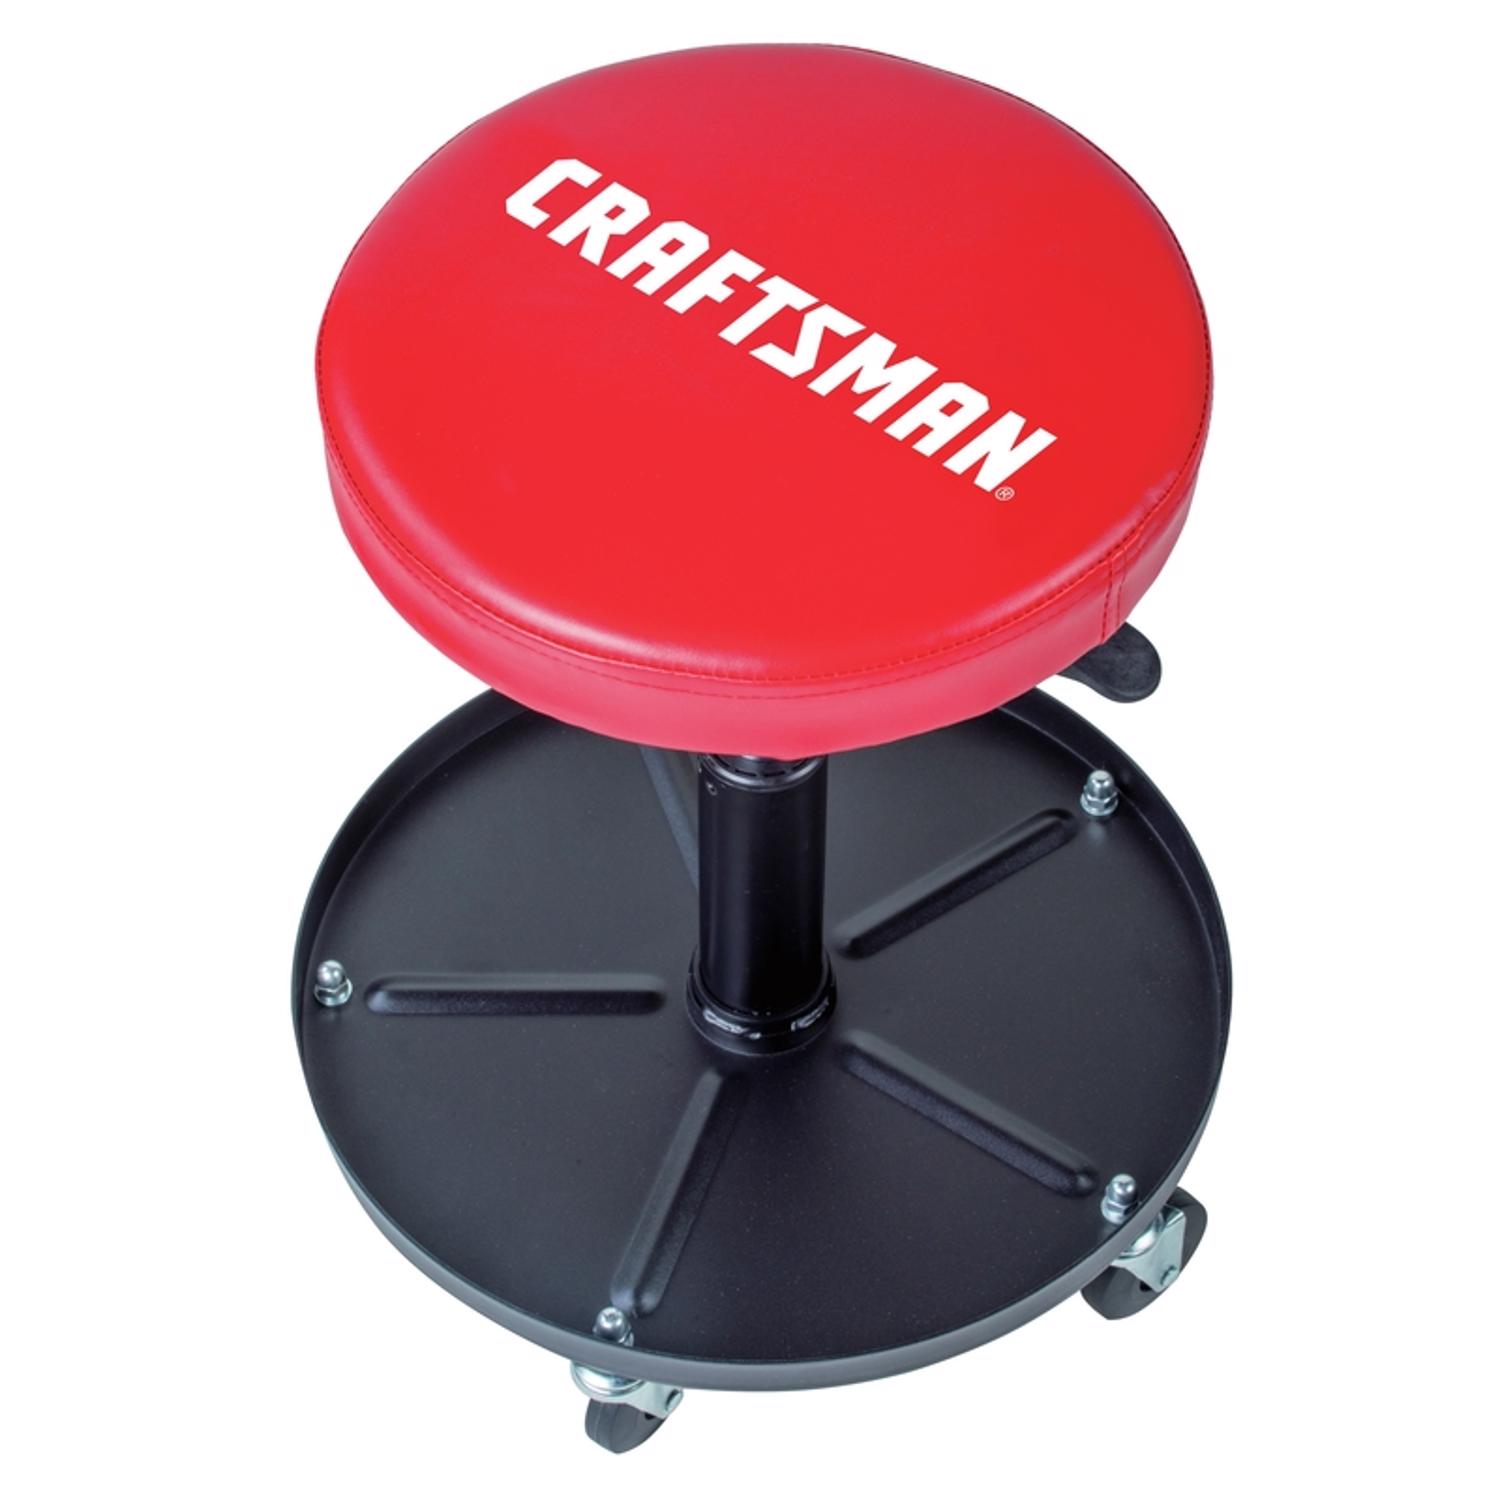 Craftsman Adjustable Mechanics Seat with Tray (19-1/2 in. H X 16 in. W X 16 in. L)